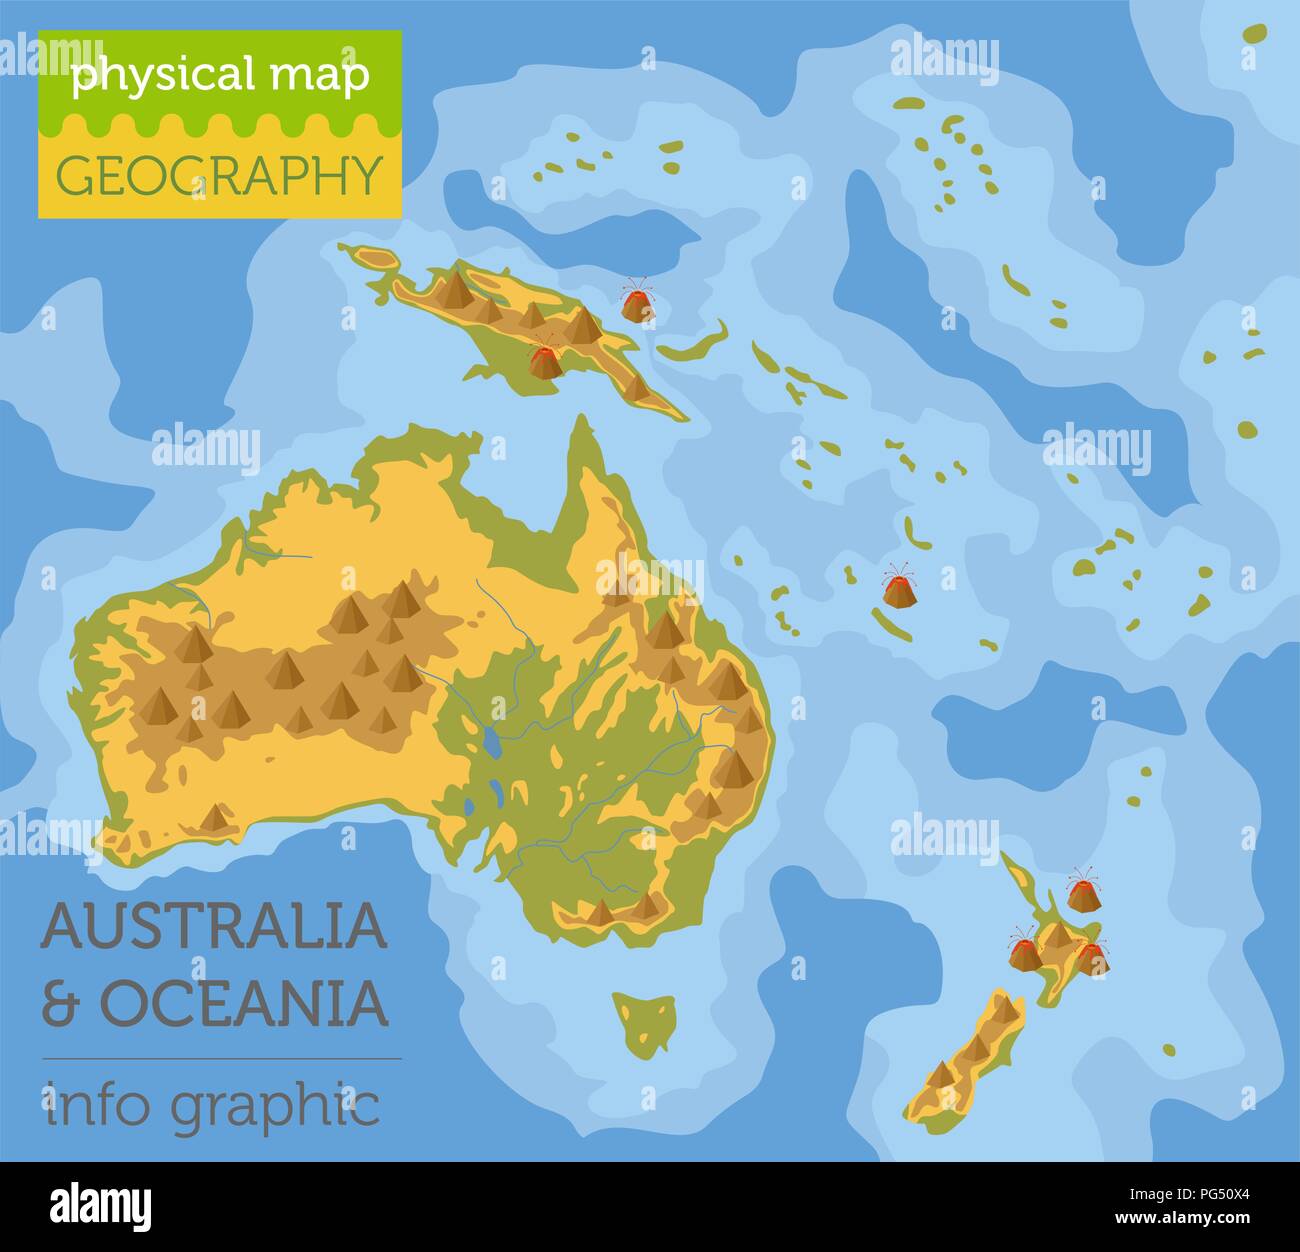 Australia and Oceania physical map elements. Build your own geography info graphic collection. Vector illustration Stock Vector